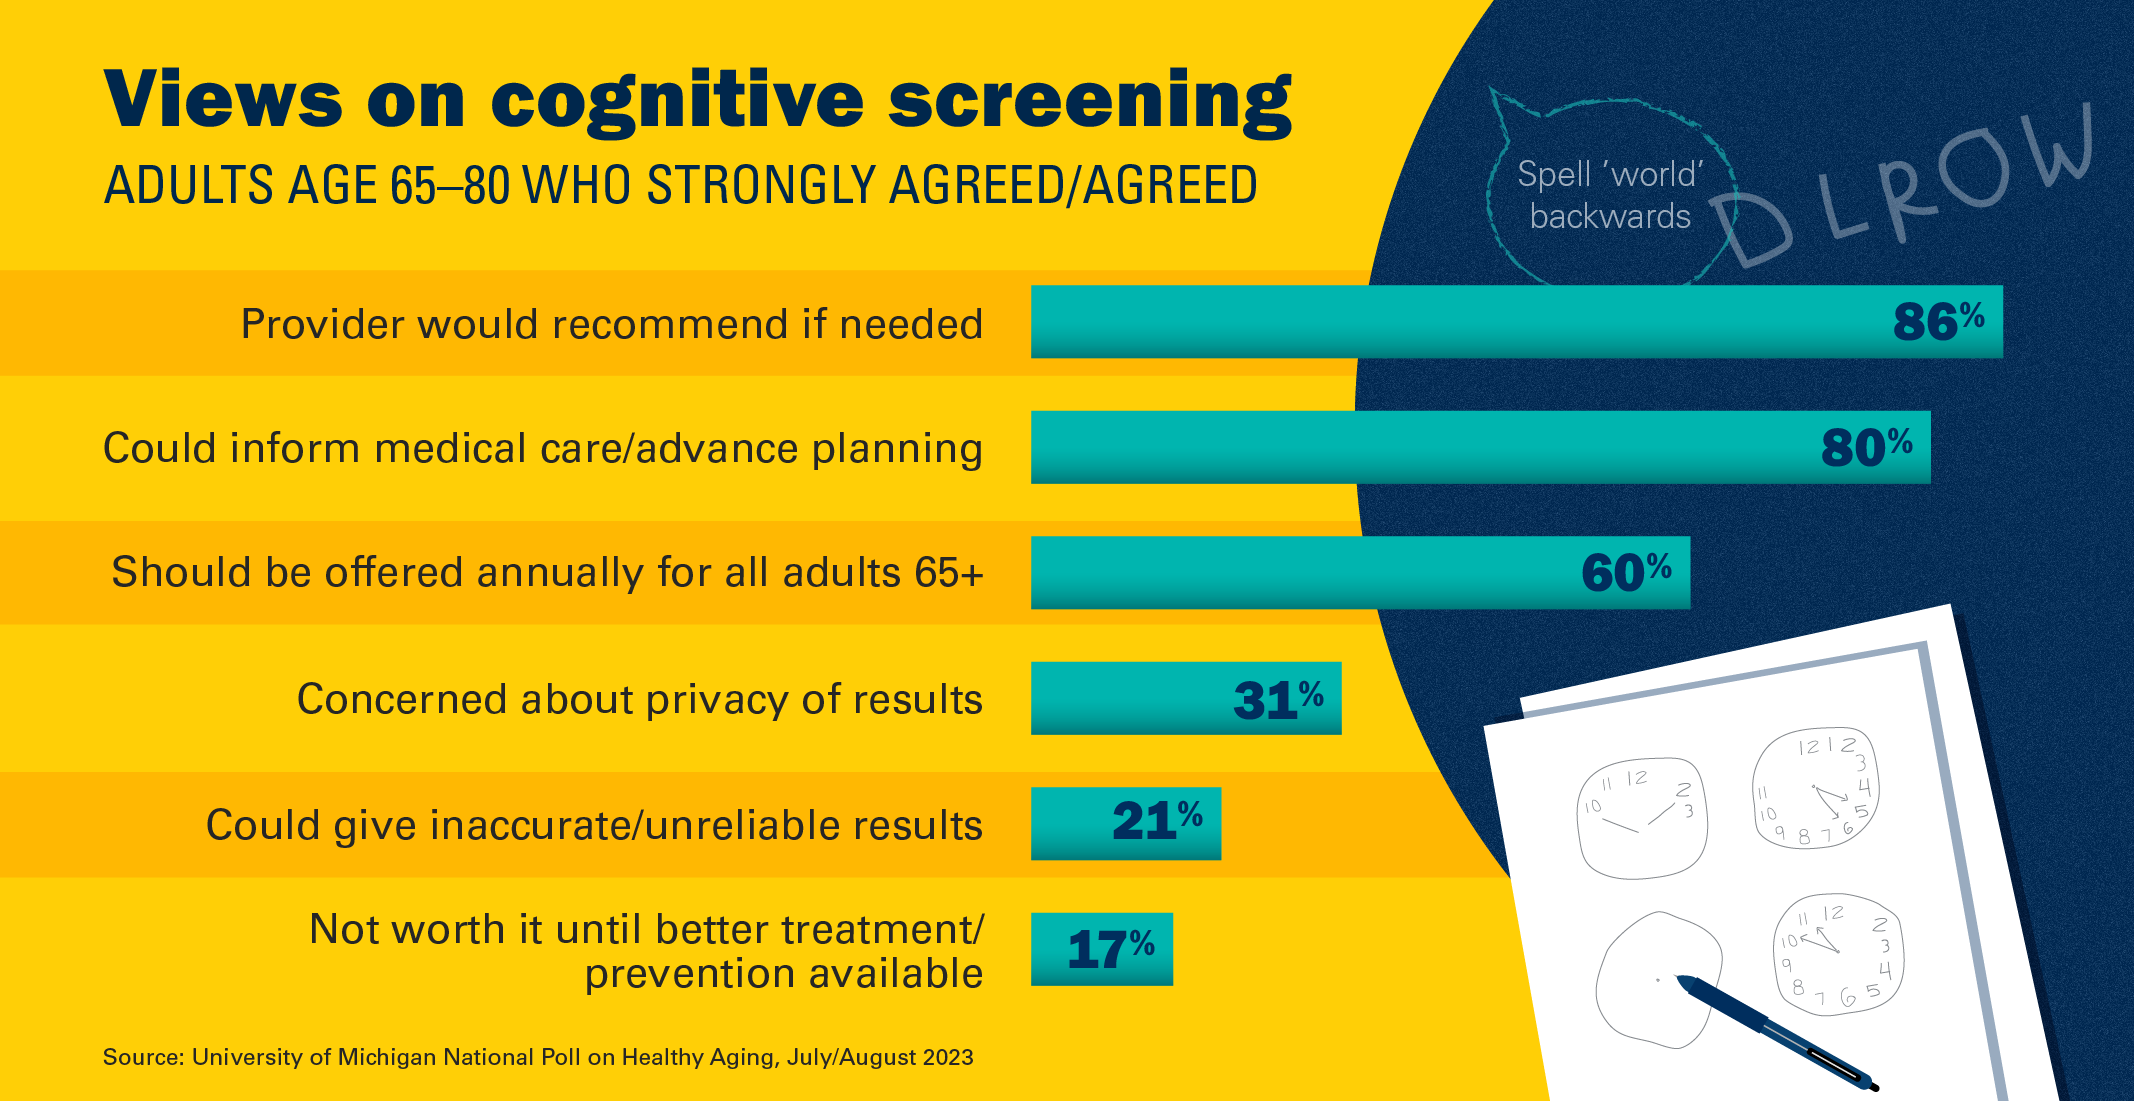 Views on cognitive screening